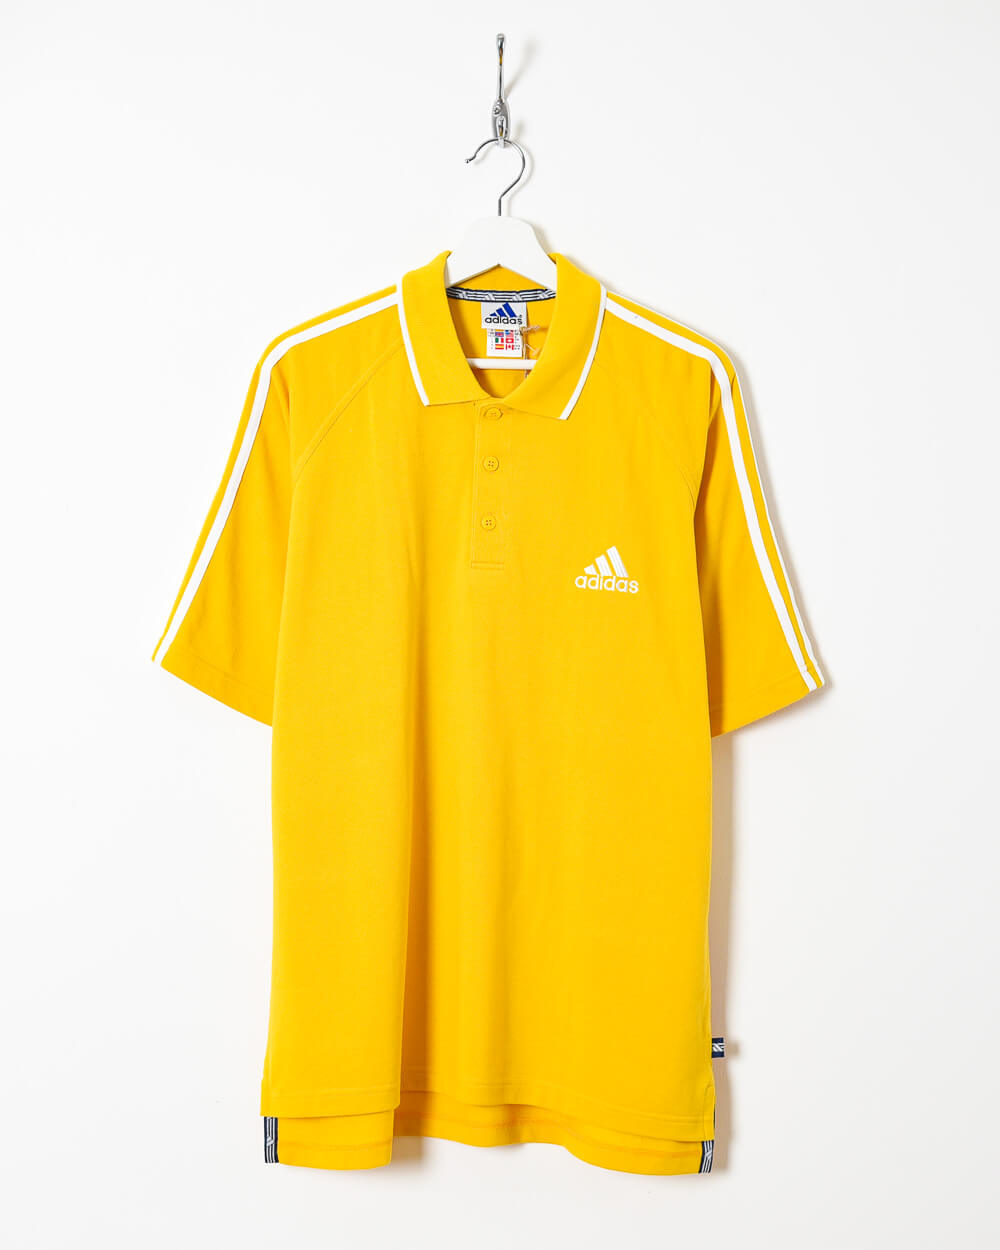 Adidas Polo Shirt - Large - Domno Vintage 90s, 80s, 00s Retro and Vintage Clothing 